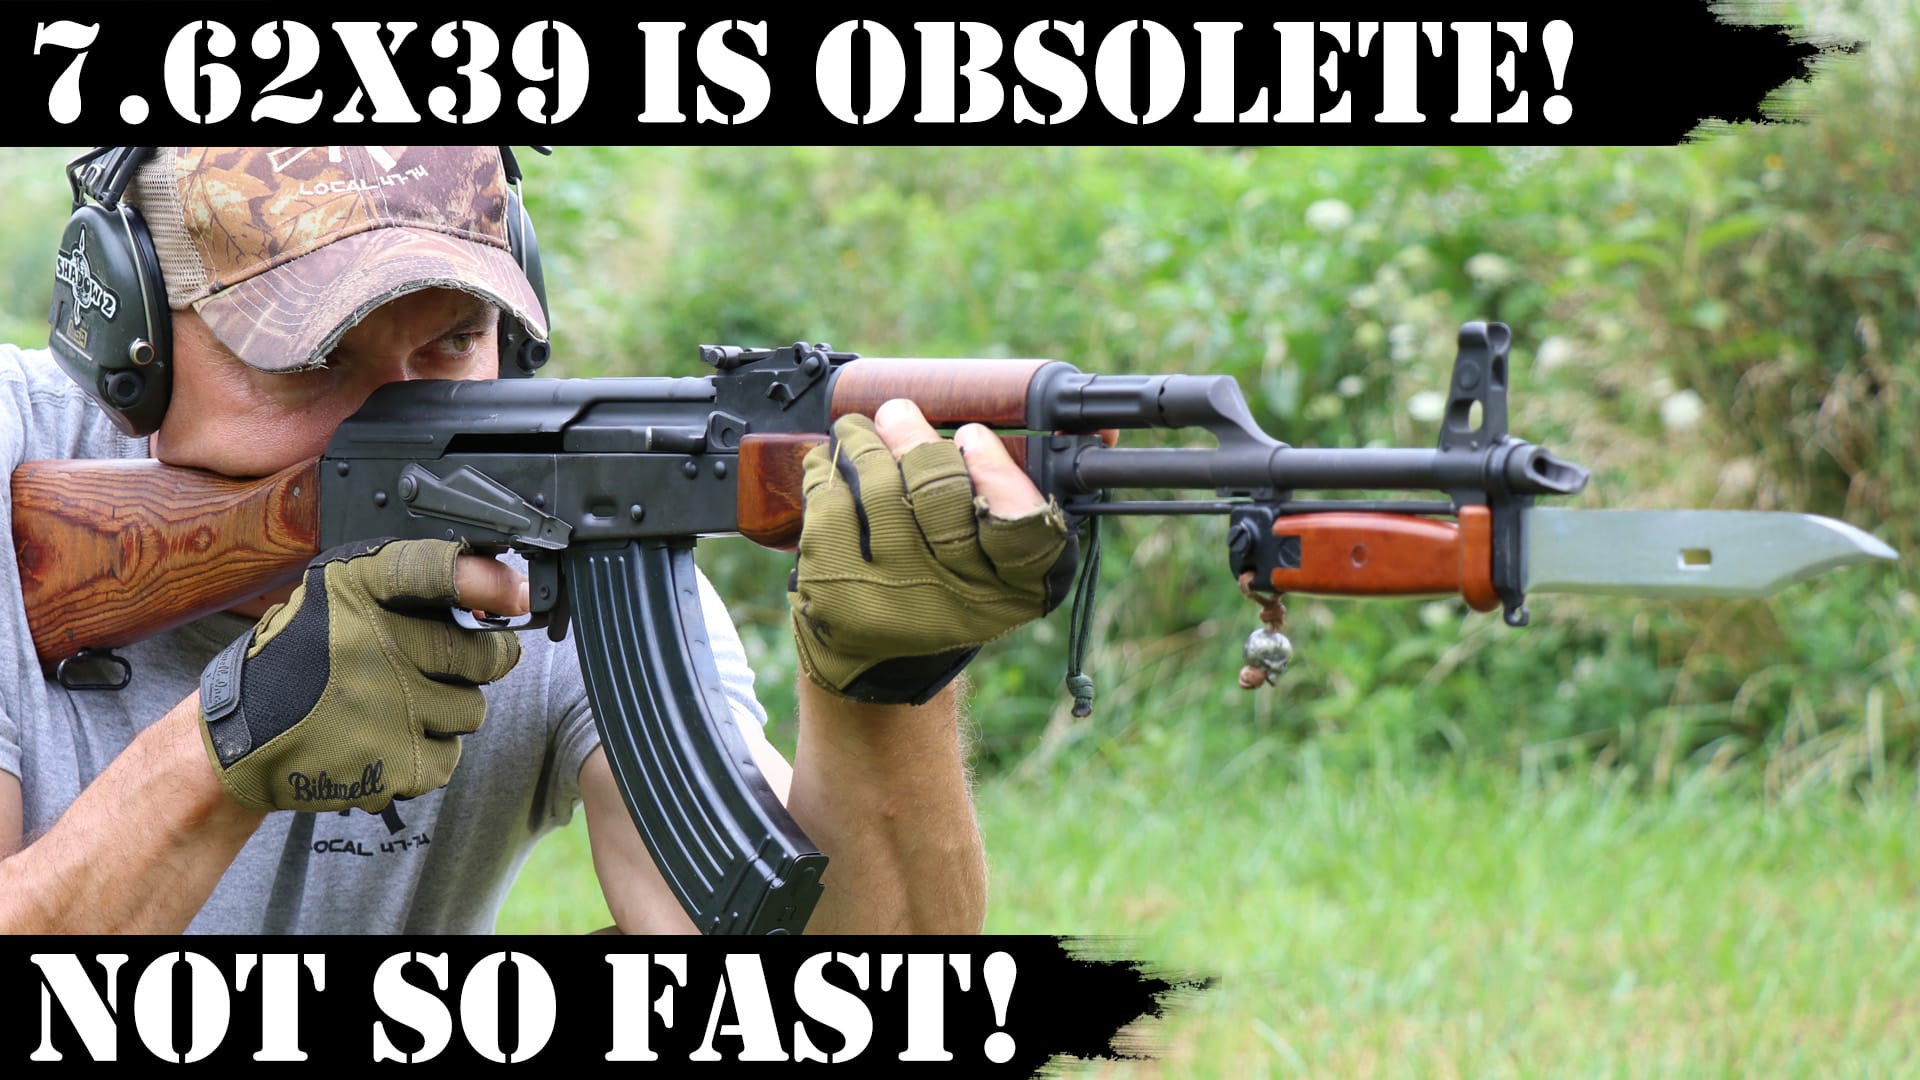 7.62×39 is Obsolete! Well, not so fast!